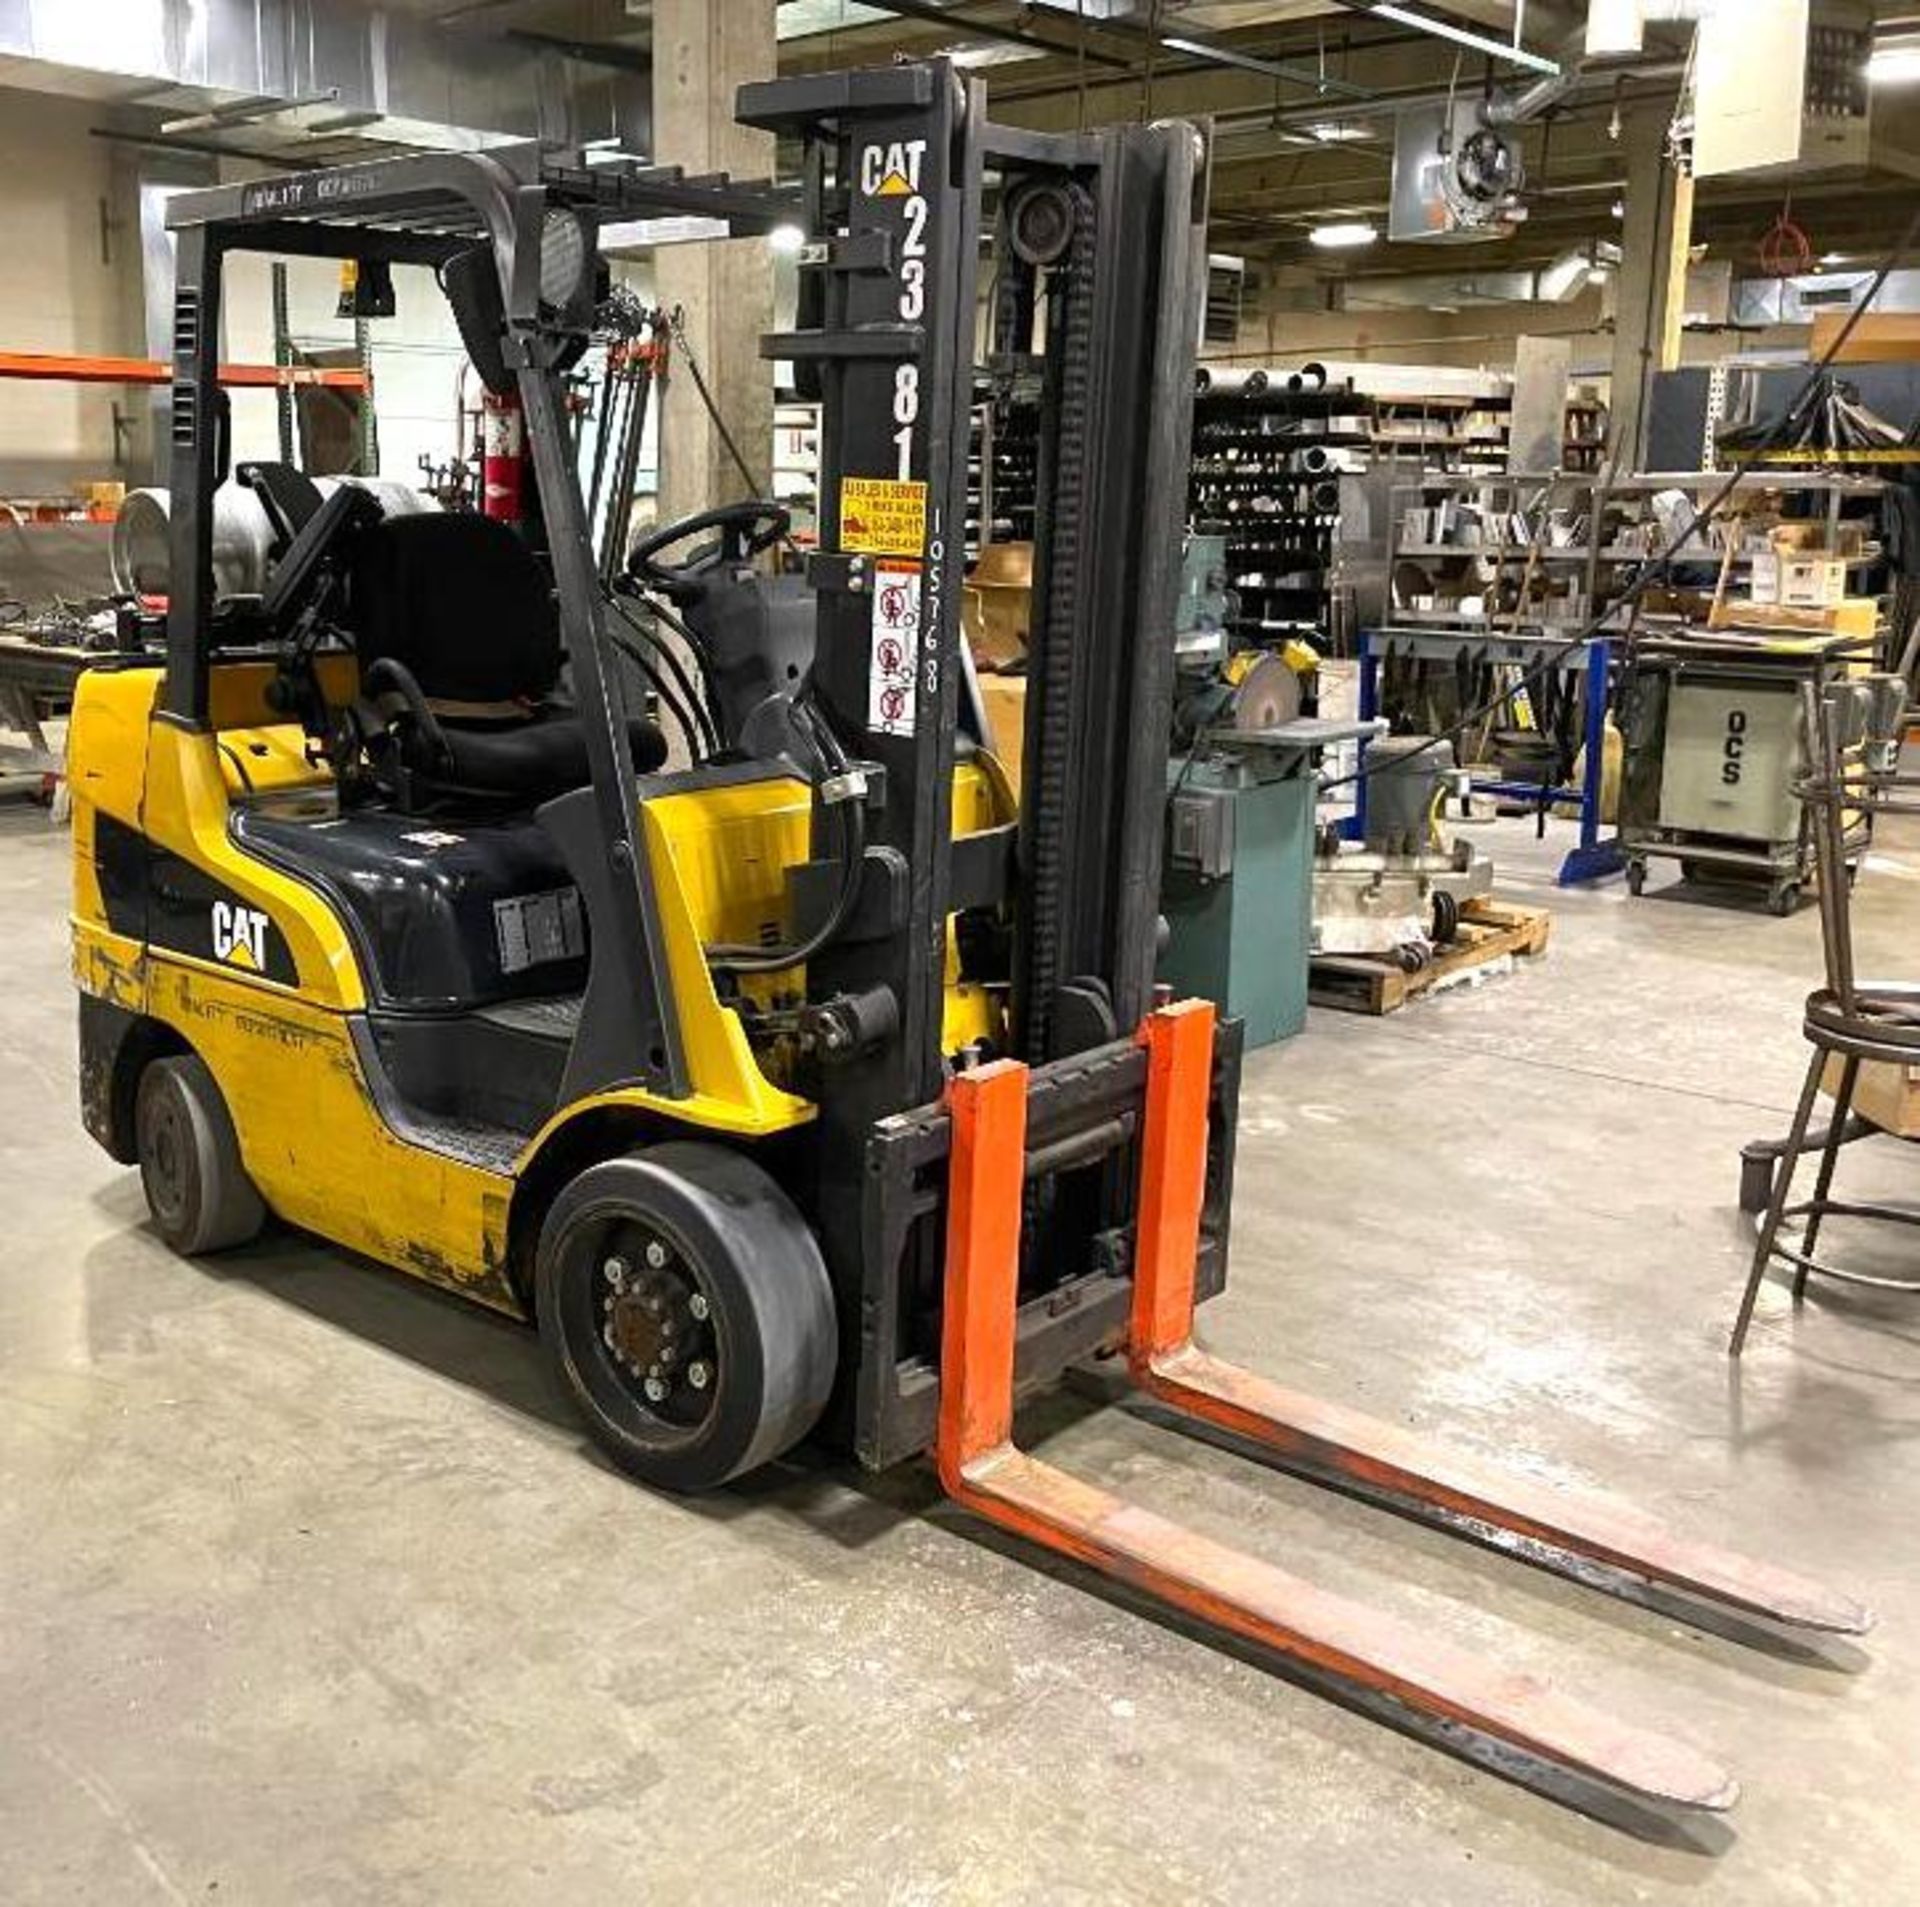 CAT 6,000 LB. FORKLIFT BRAND/MODEL: 2C6000 INFORMATION: 5000 HRS., IN GREAT CONDITION LOCATION: WARE